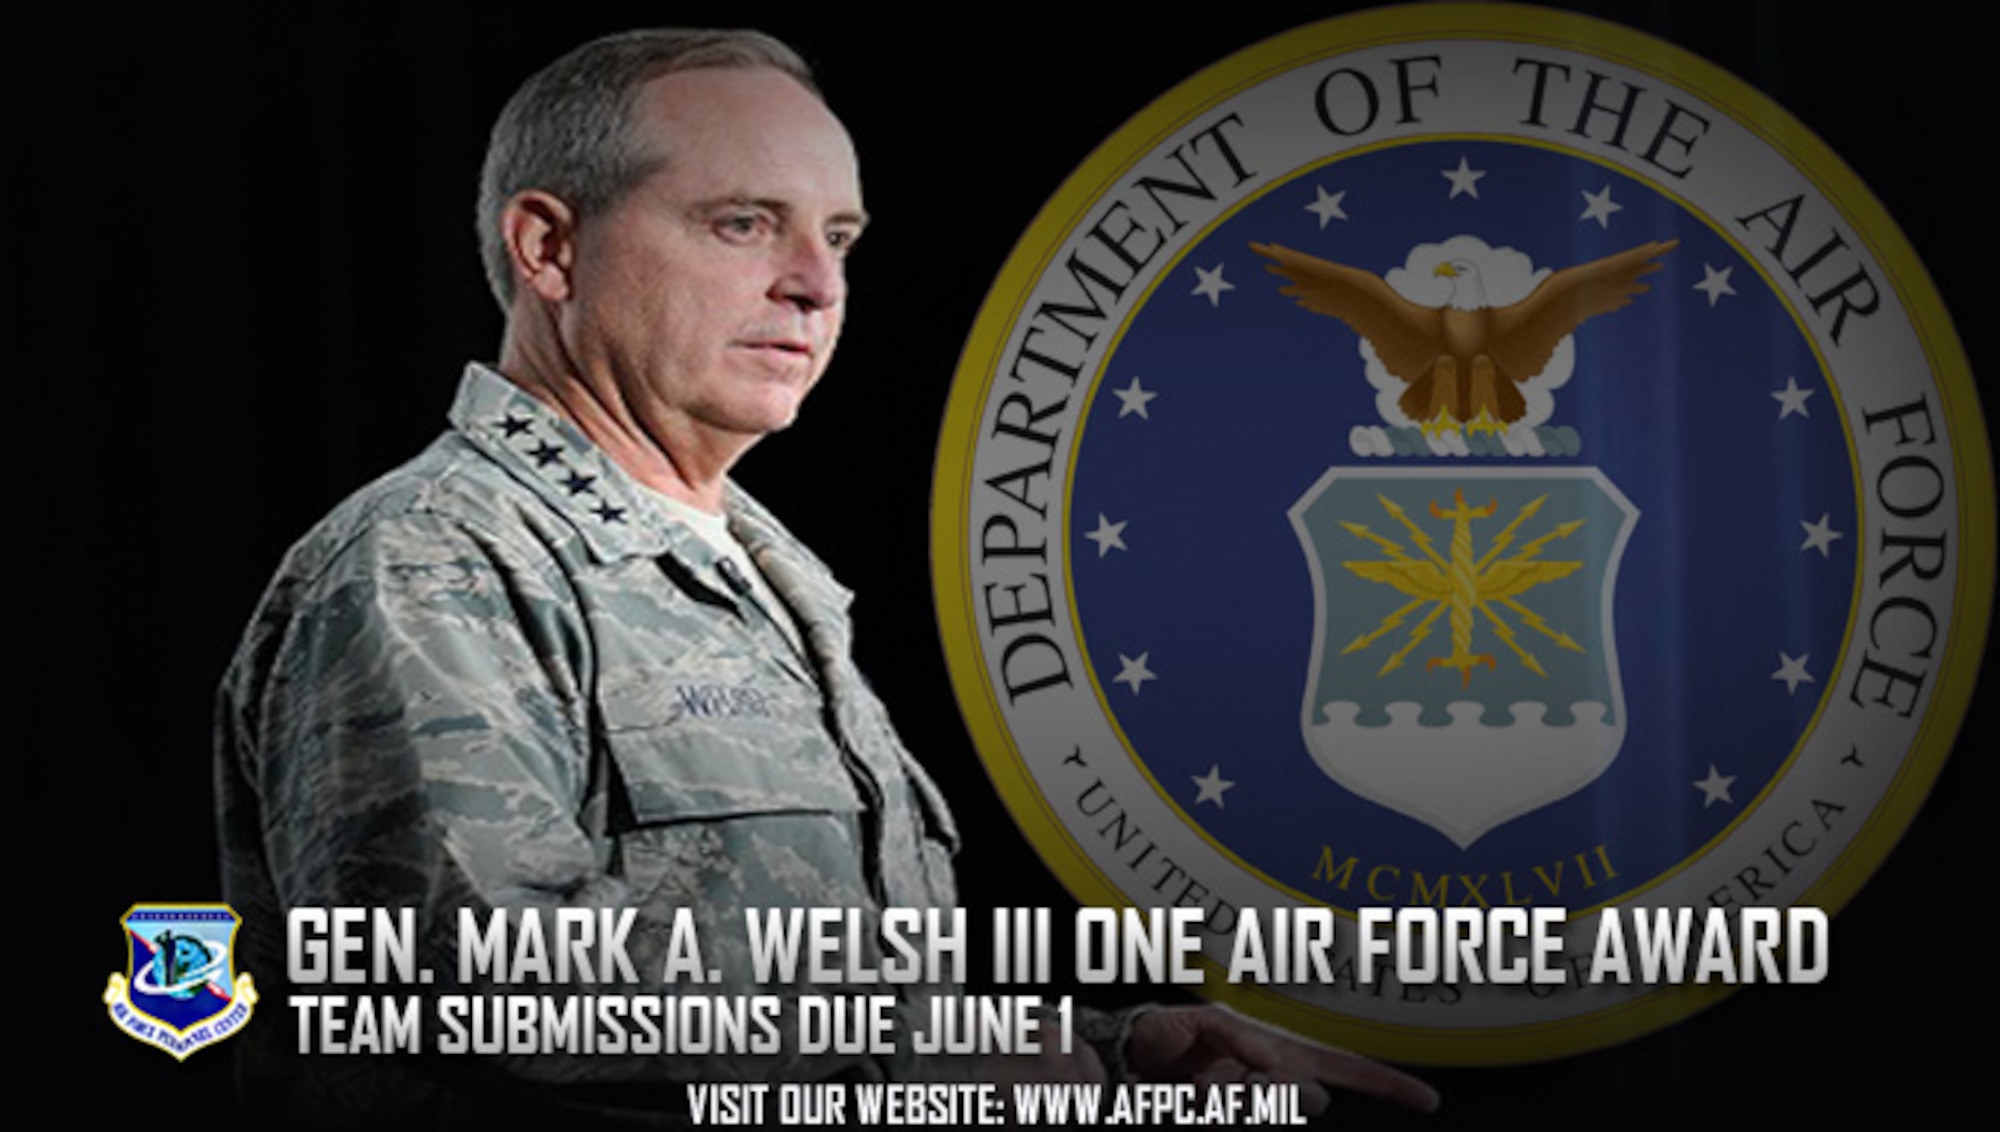 Air Force officials are seeking nominations for the 2017 Gen. Mark A. Welsh III One Air Force Award, which recognizes mission success achieved by a team make up of two or more Total Force components, will be presented to the top team that demonstrates improved effectiveness, operational readiness or mission accomplishment through integrated solutions. Nomination packages are due to the Air Force Personnel Center no later than June 1, 2017. (U.S. Air Force courtesy photo) 